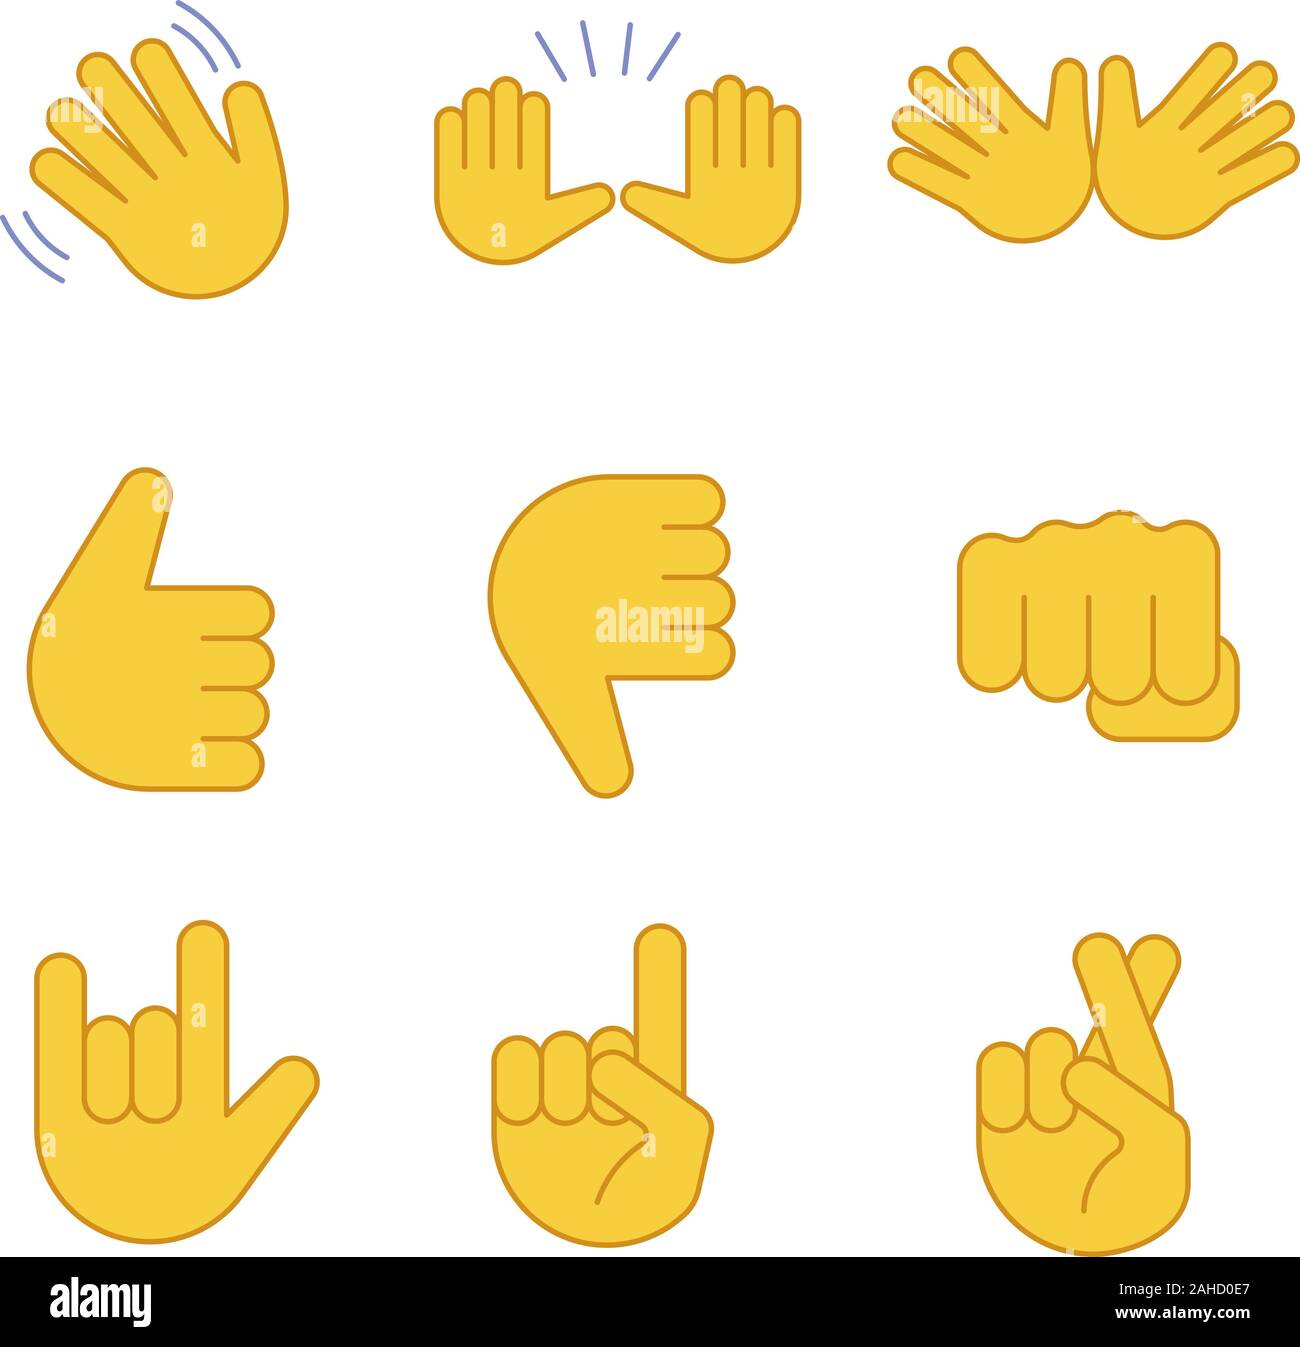 Your Guide To All The Hand Emojis